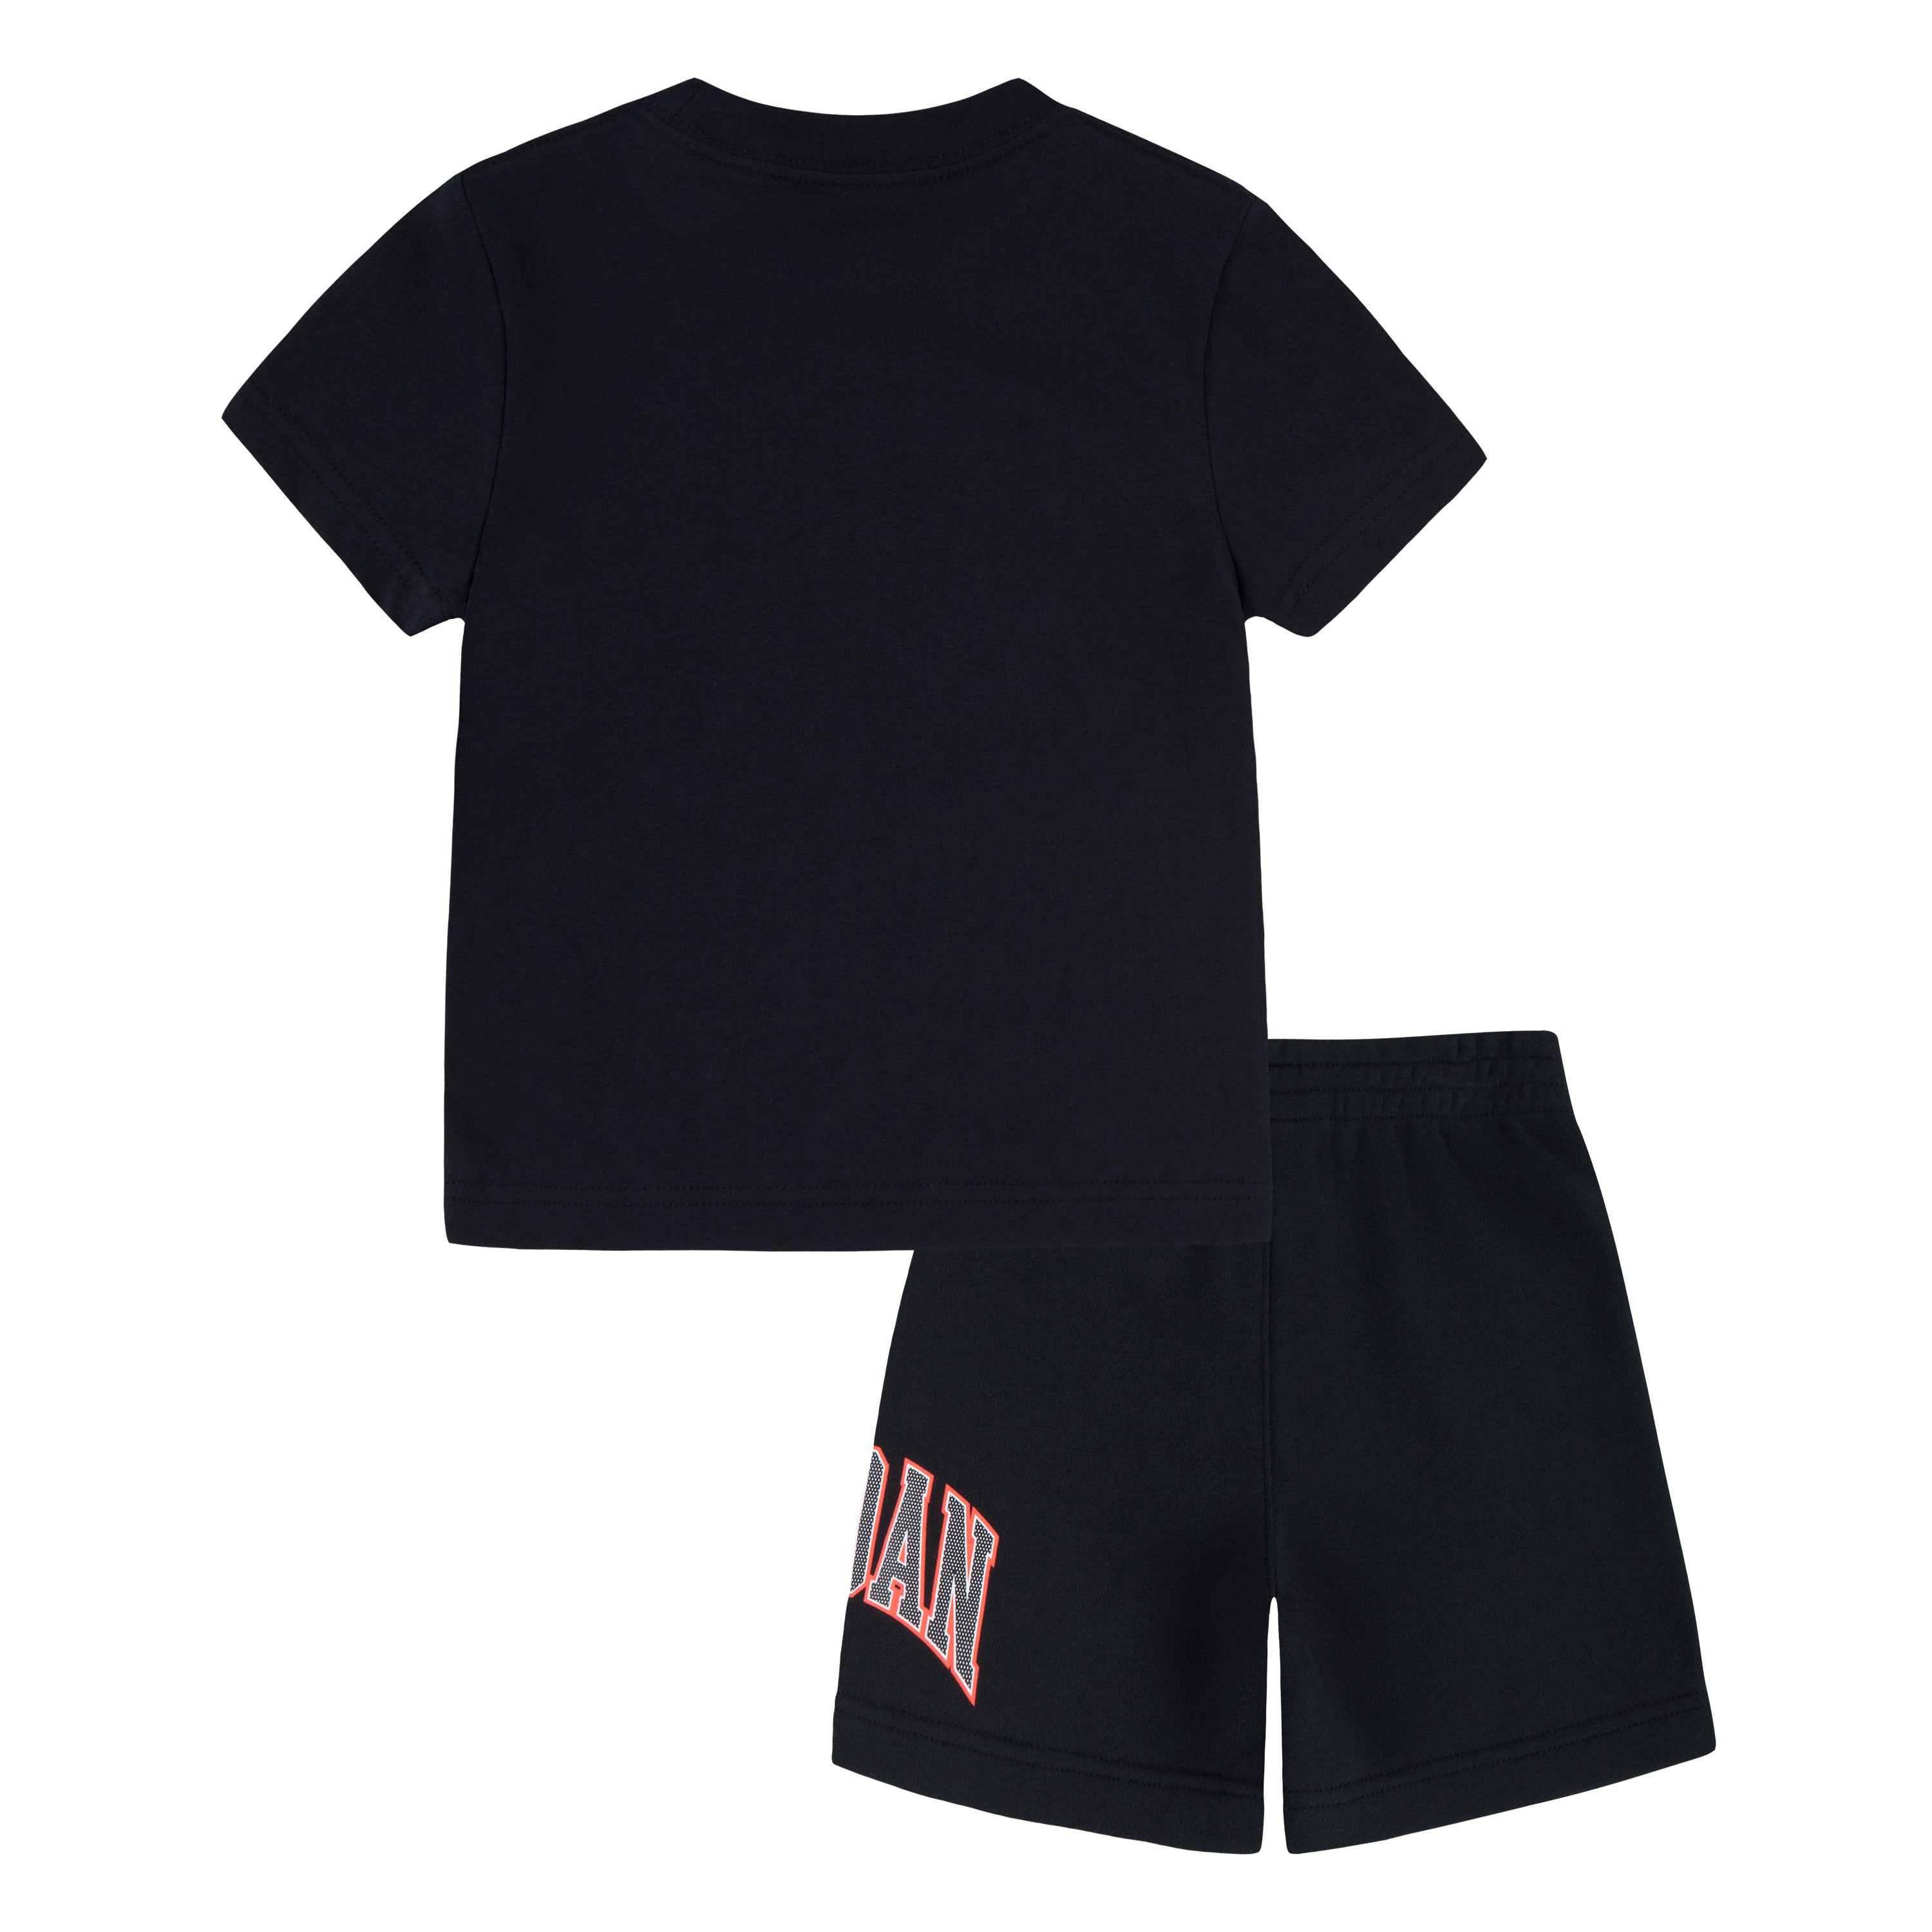 Infant Home and Away Shorts Set